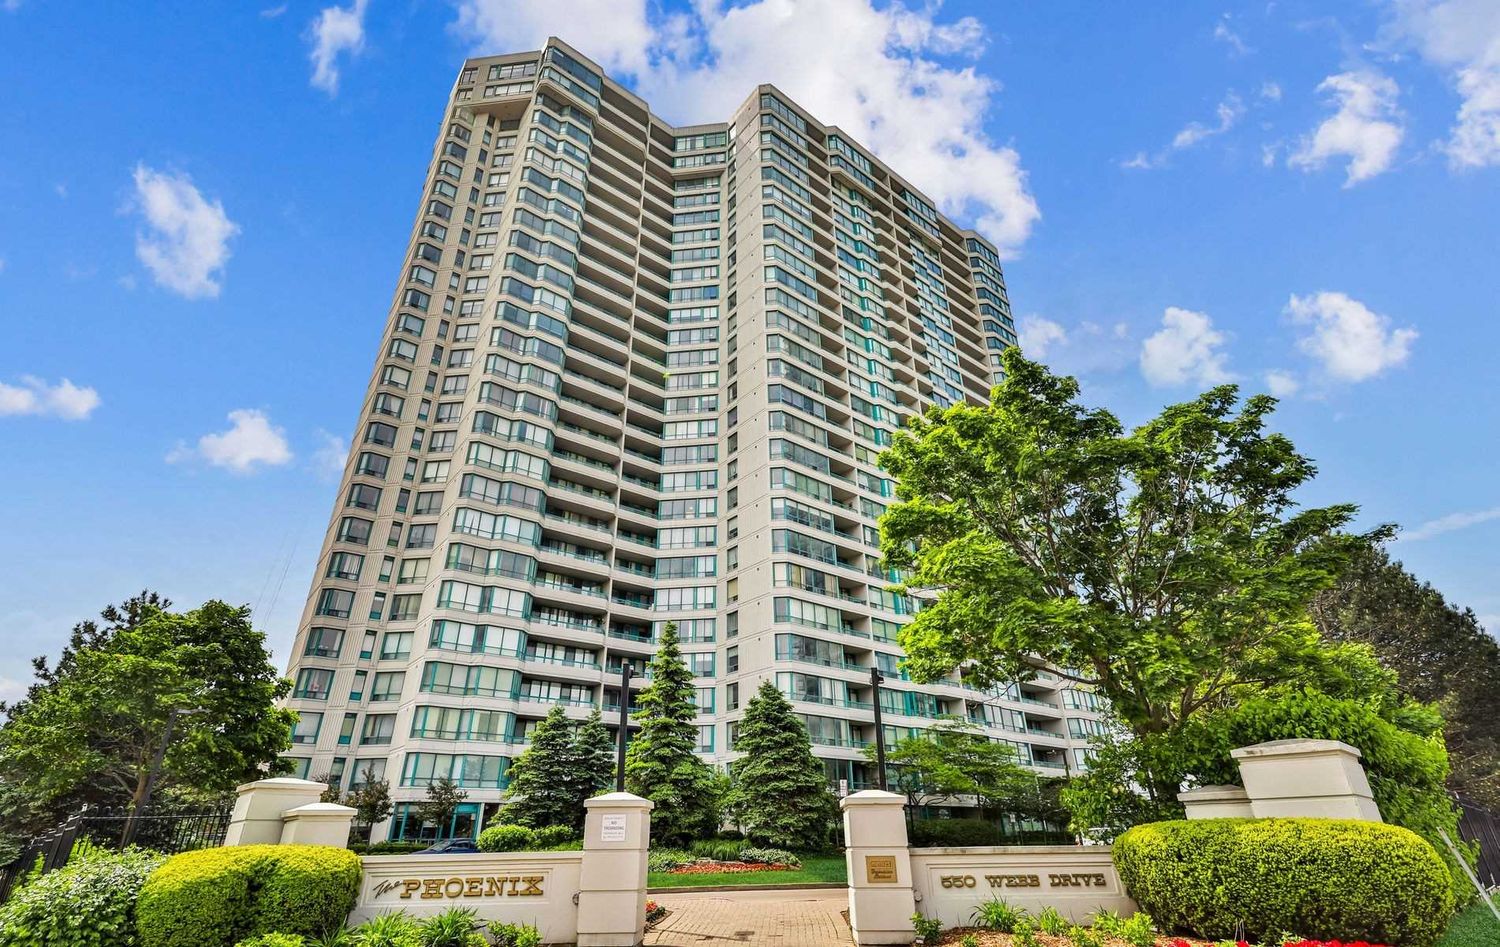 550 Webb Drive. Phoenix Condos is located in  Mississauga, Toronto - image #2 of 2